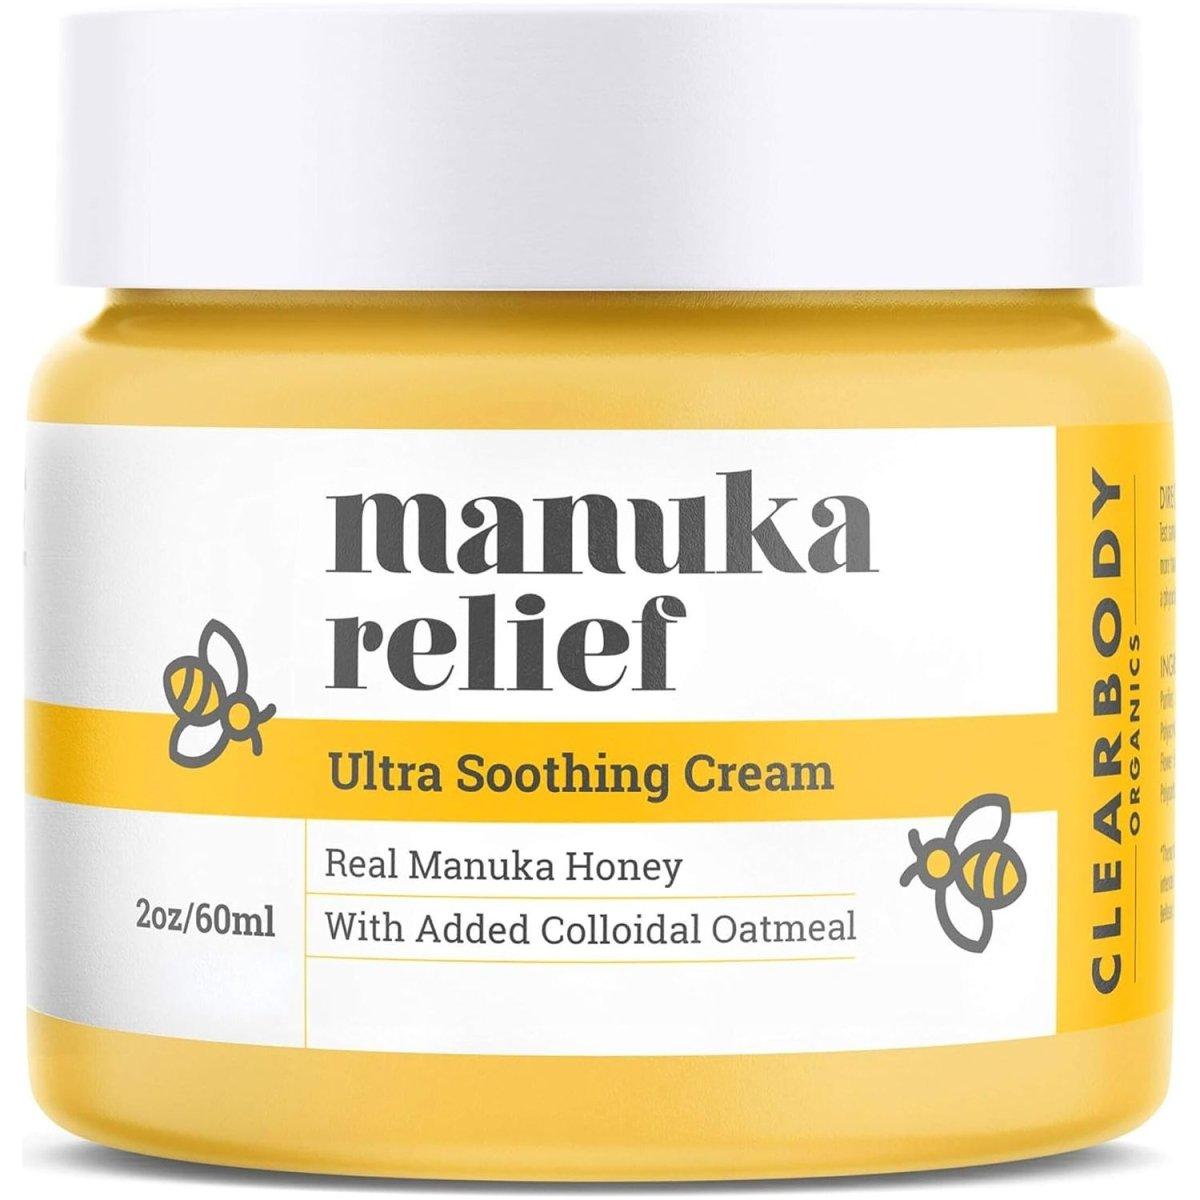 Clearbody Manuka Relief Ultra Soothing Cream - 60ml - Glam Global UK